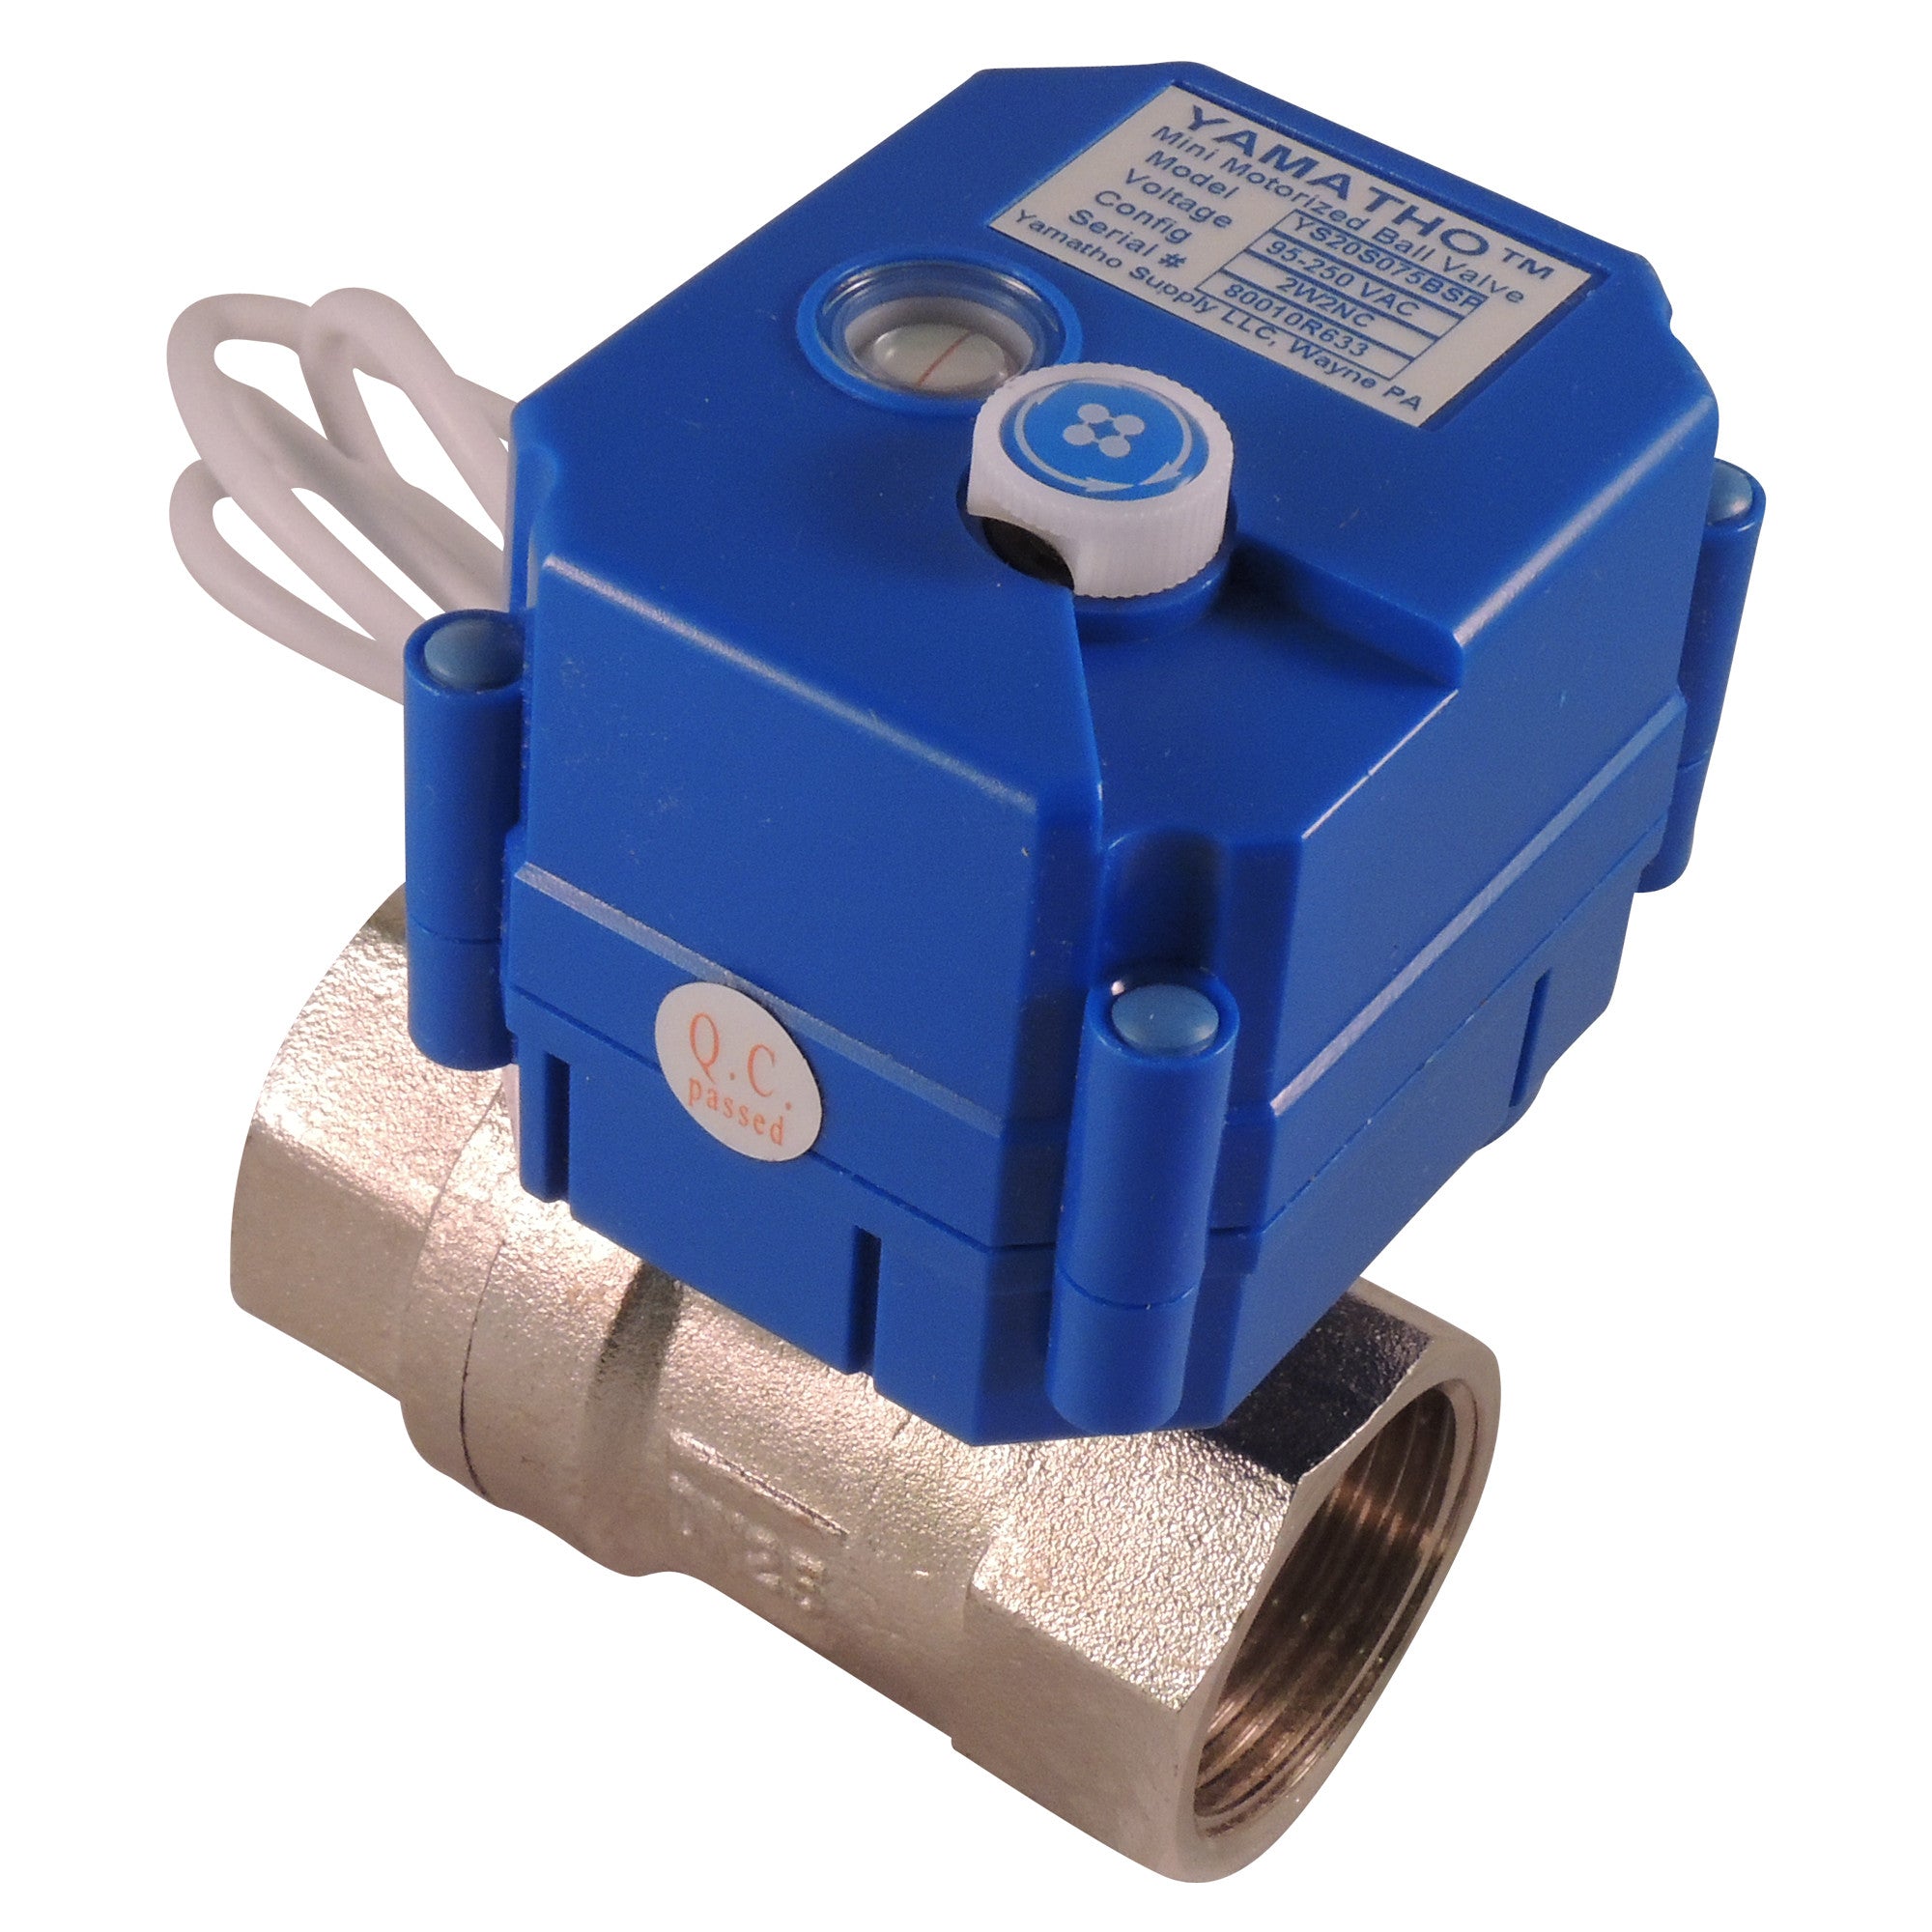 Electric motorized water control valve YS20S, 2 wires actuator 95-250 VAC Normally Closed - Yamatho Supply